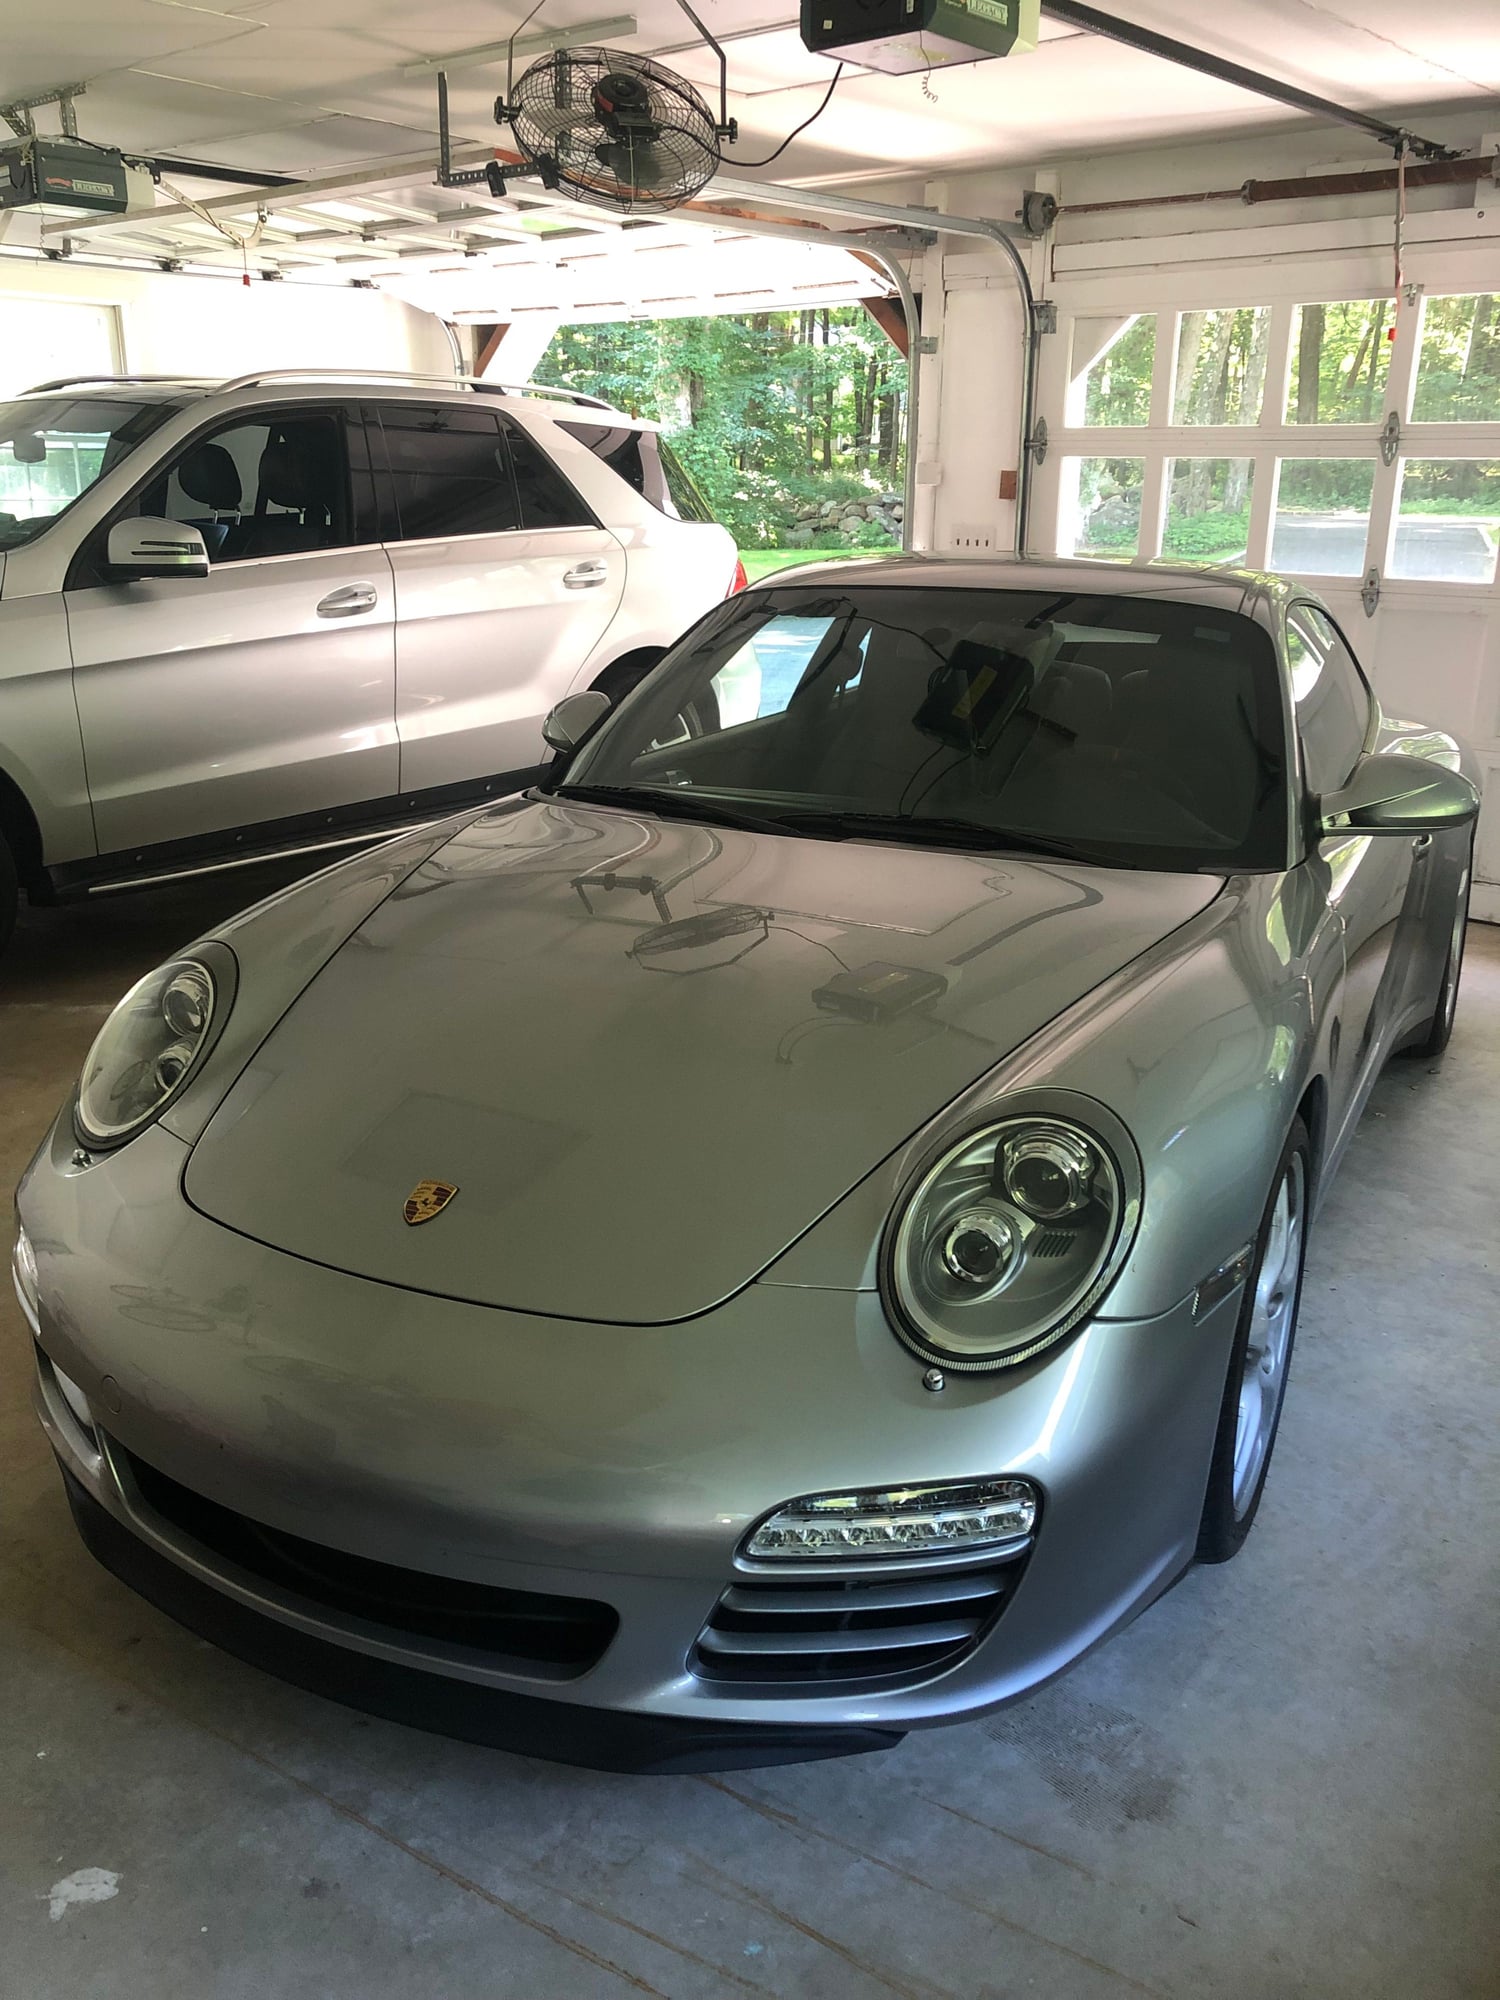 2010 Porsche 911 - 2010 C4S Coupe - Manual - Full Leather - 20k mi - Used - VIN WP0AB2A96AS721131 - 21,000 Miles - 6 cyl - 4WD - Manual - Coupe - Silver - Greenwich, CT 06831, United States